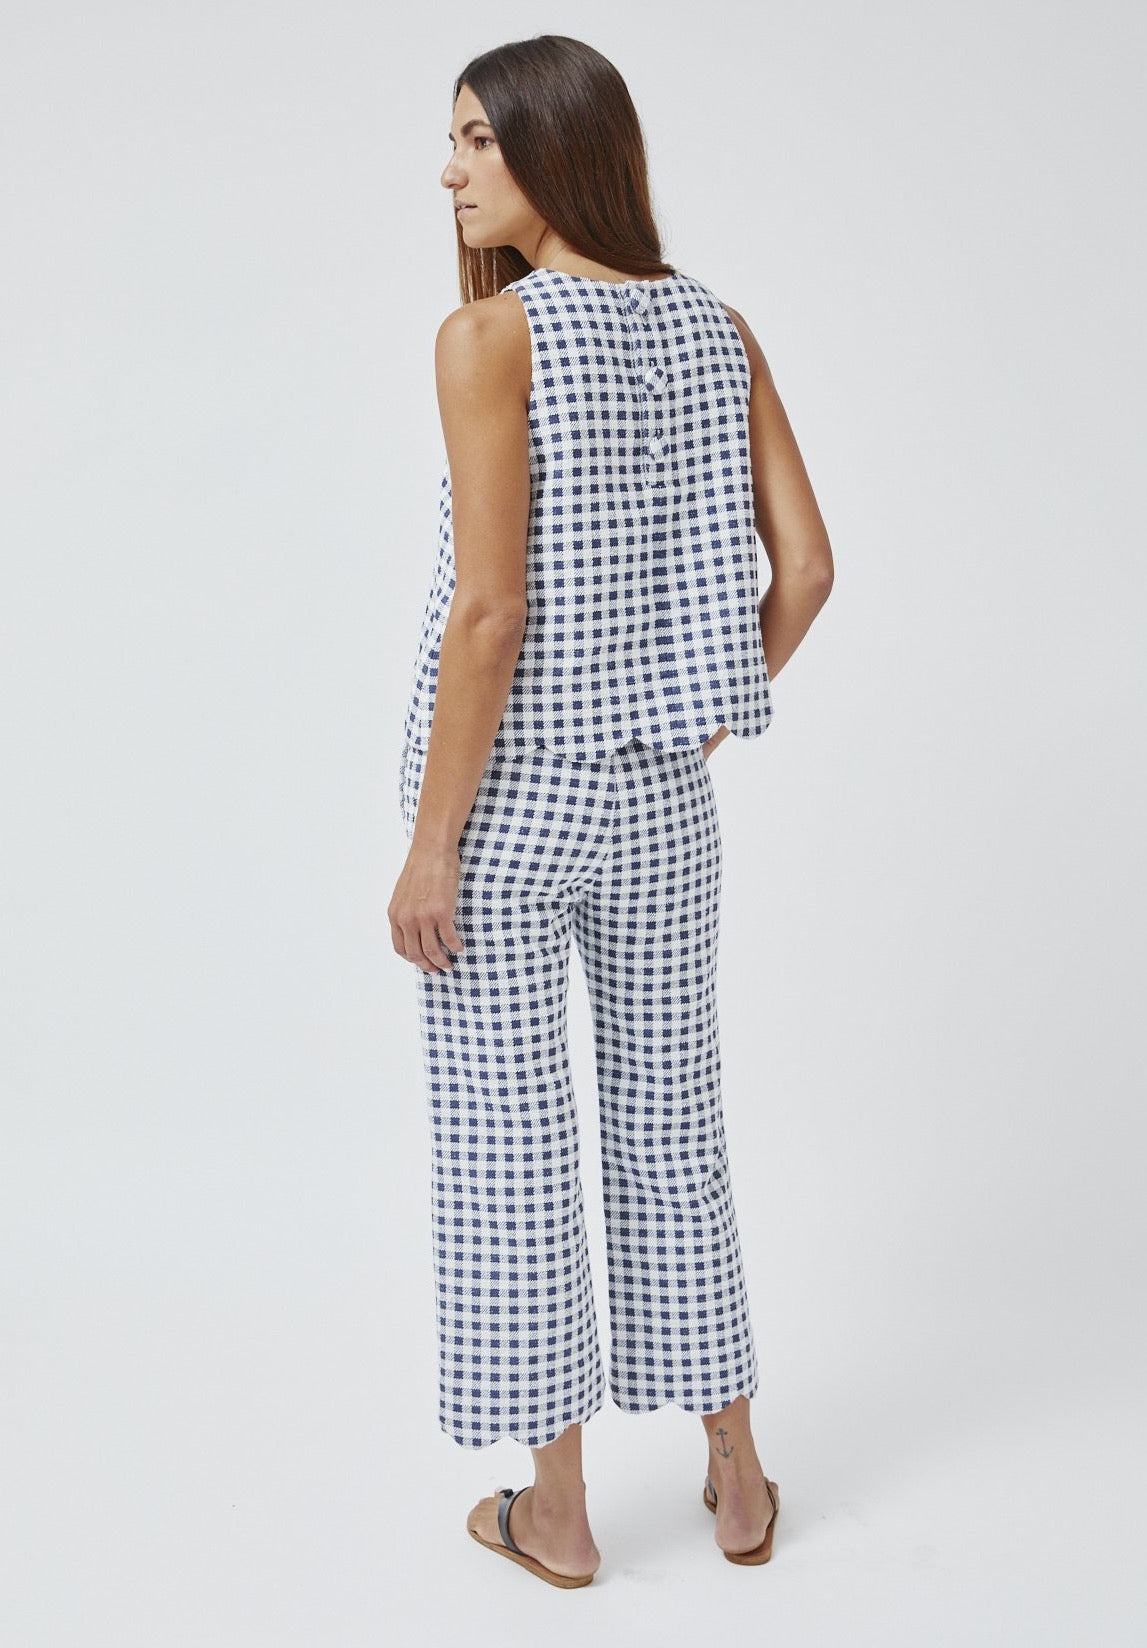 THE SCALLOP PANT in NAVY GINGHAM BOUCLE COTTON